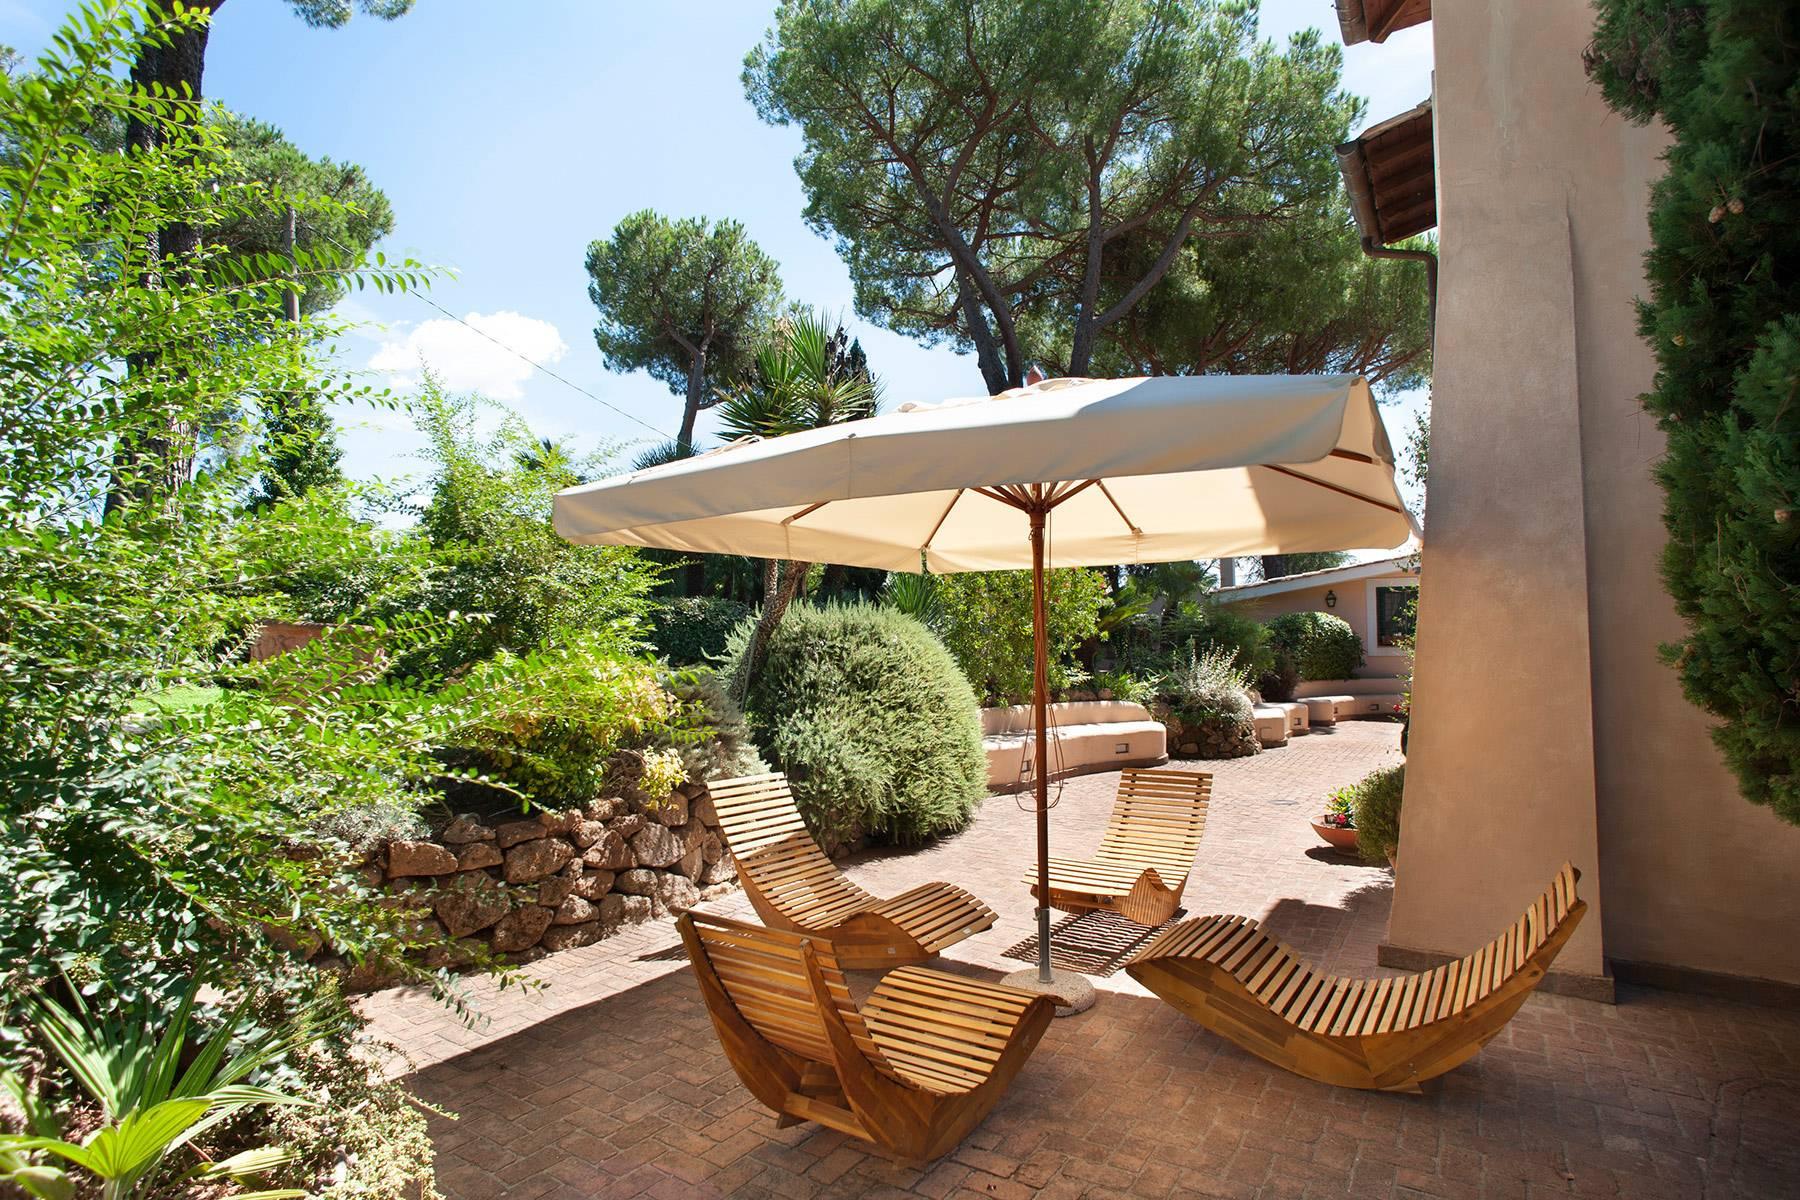 Villa Nayara - Lovely mansion with swimming pool 30 minutes from Rome - 8